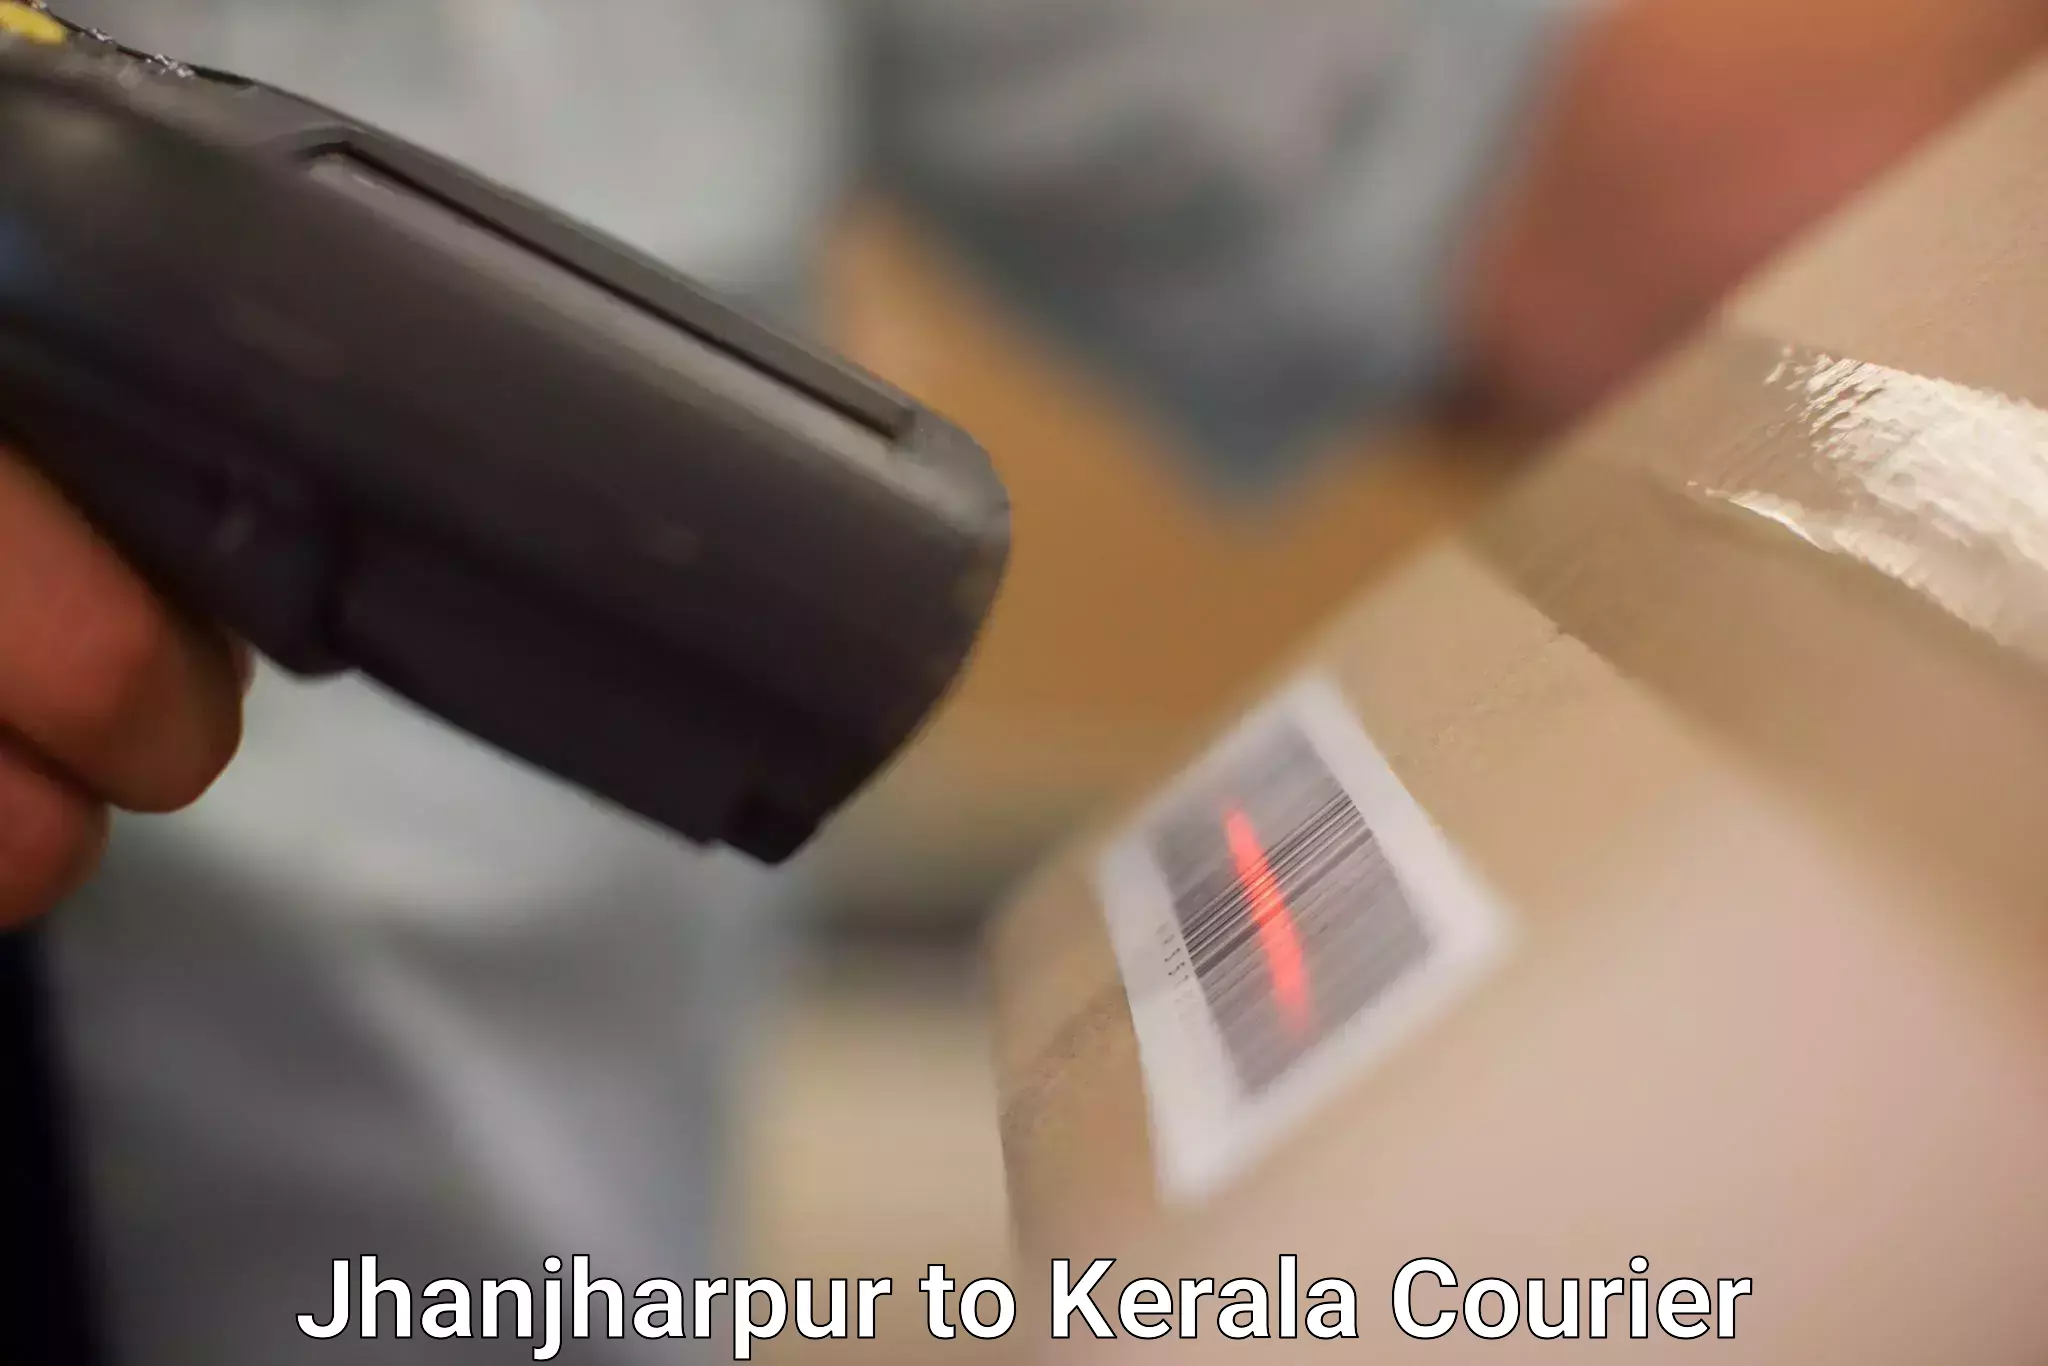 Quality courier services in Jhanjharpur to Kerala